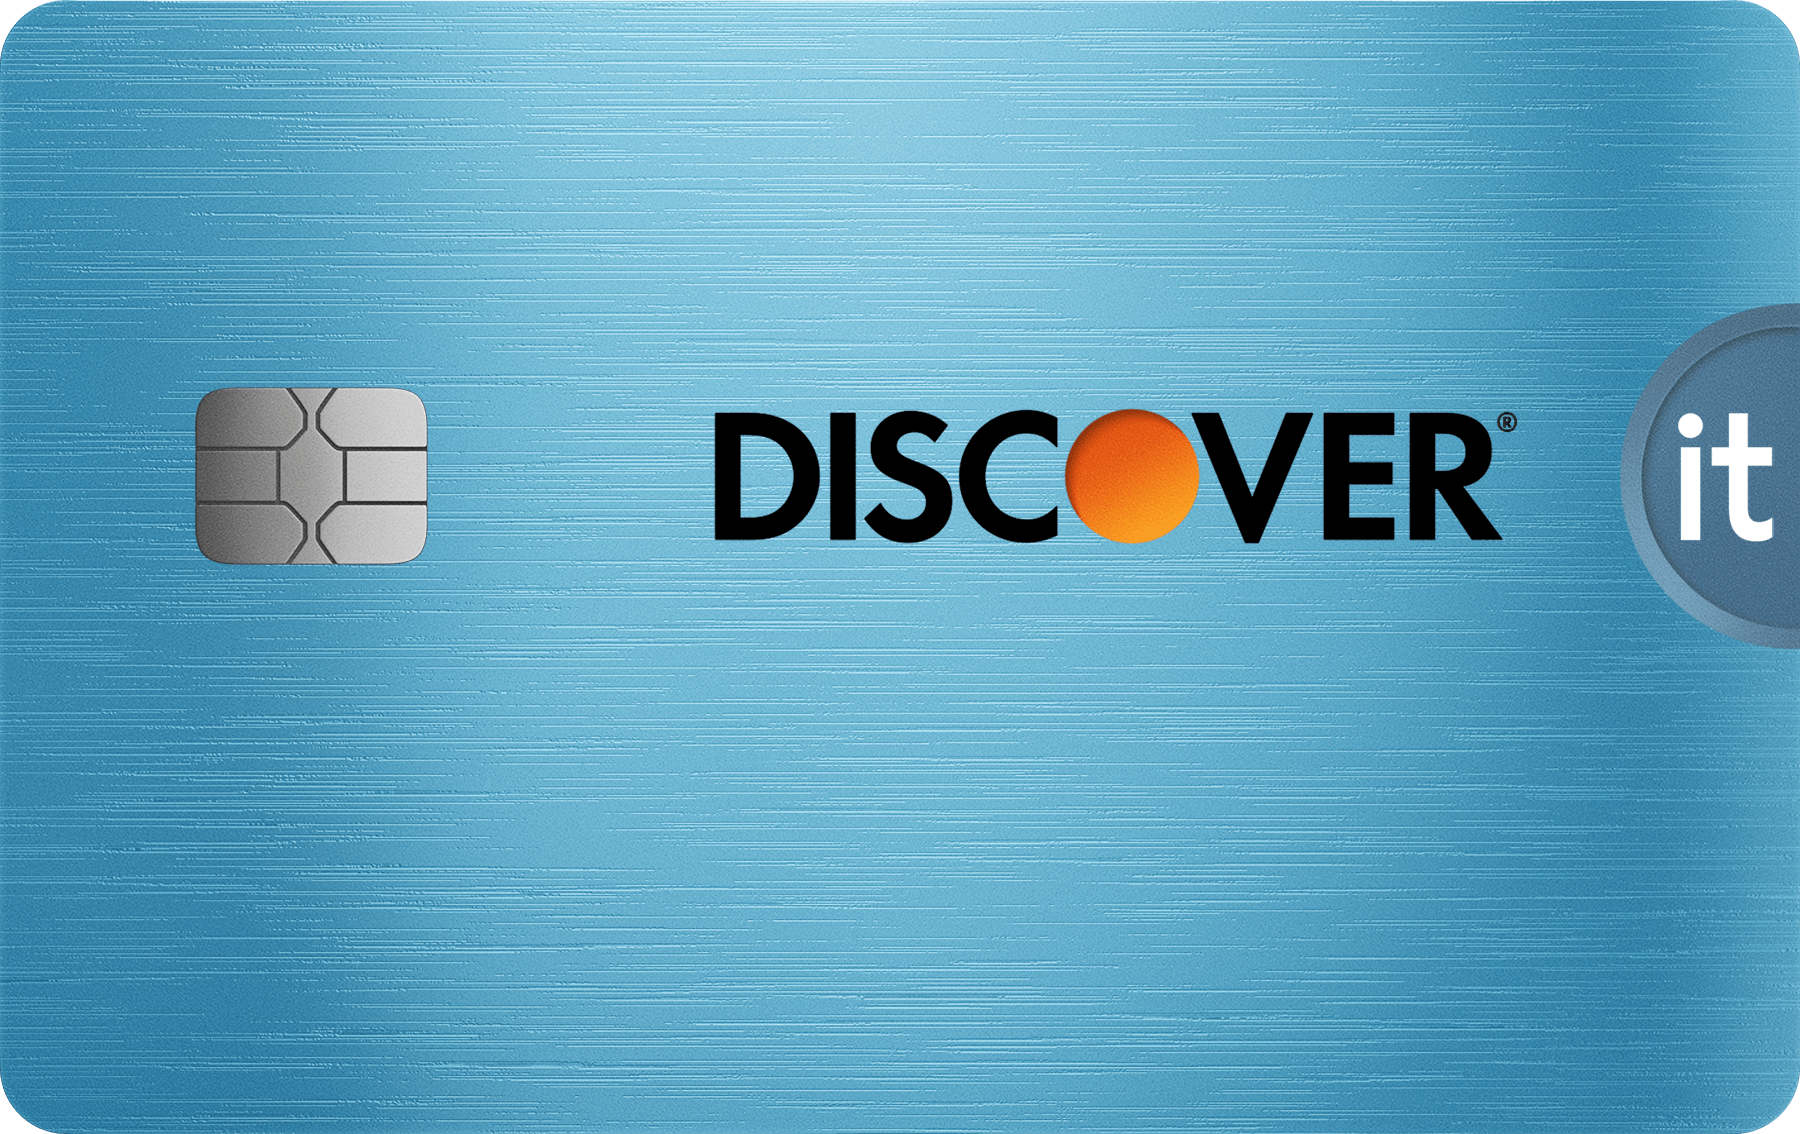 Discover it Cash Back Card